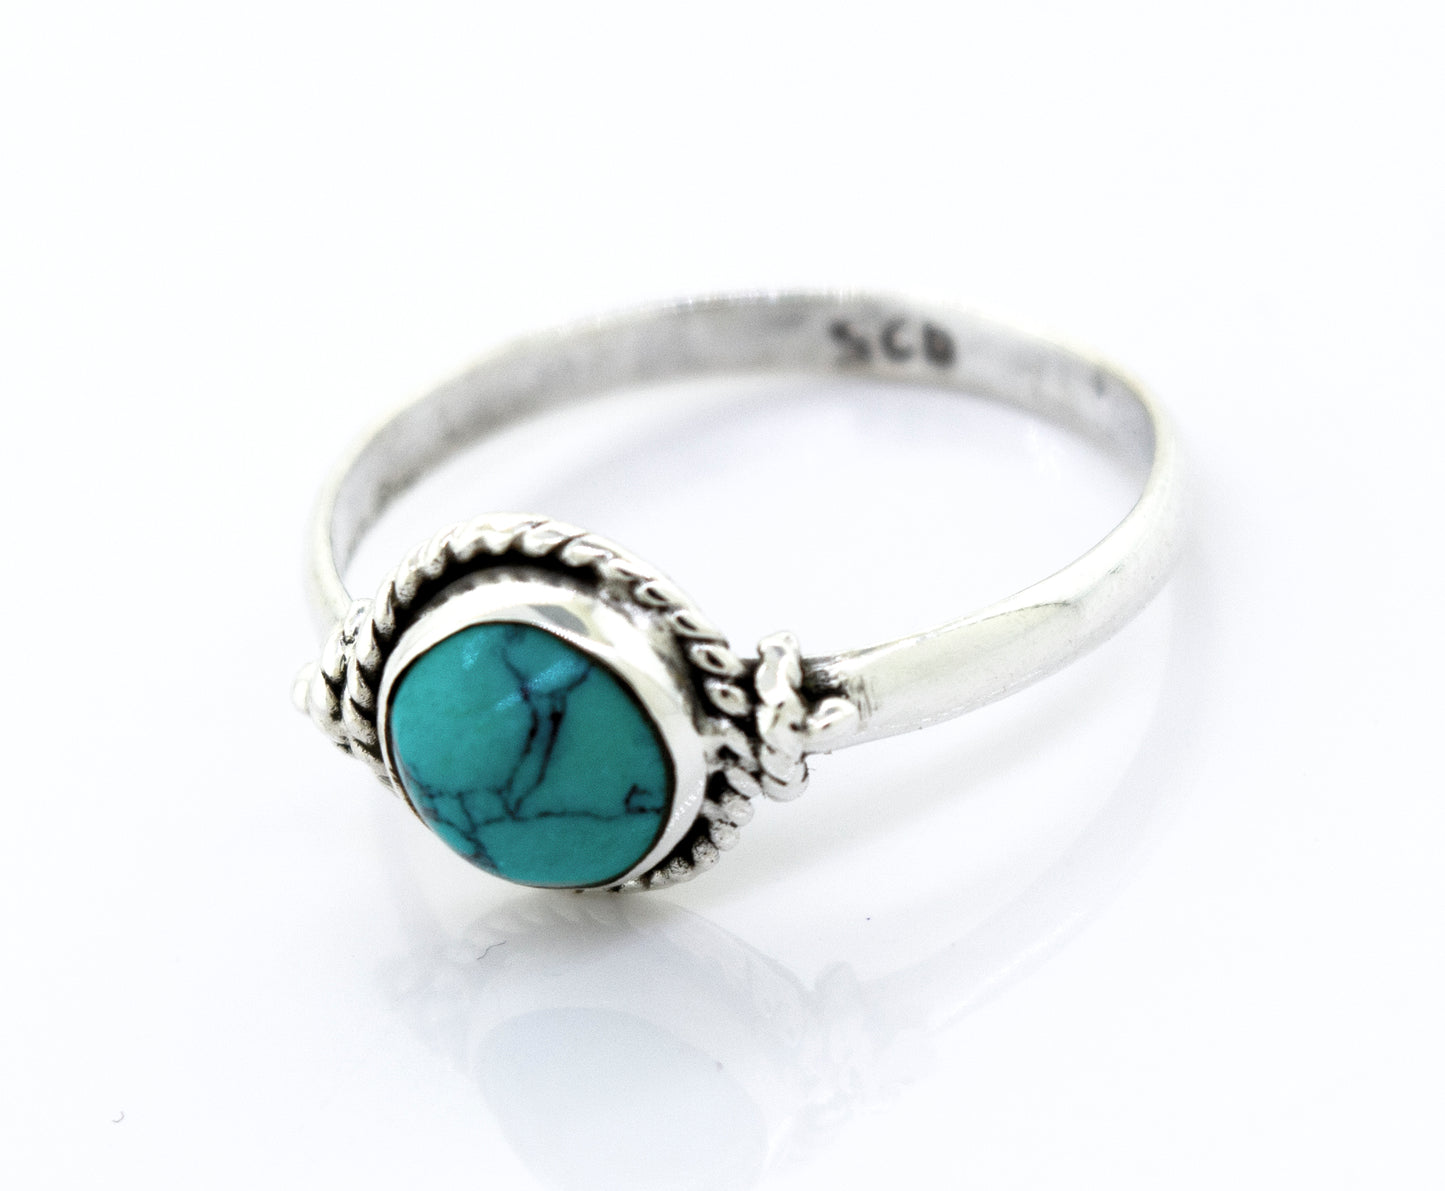 A Super Silver Simple Round Turquoise Ring With Rope Border.